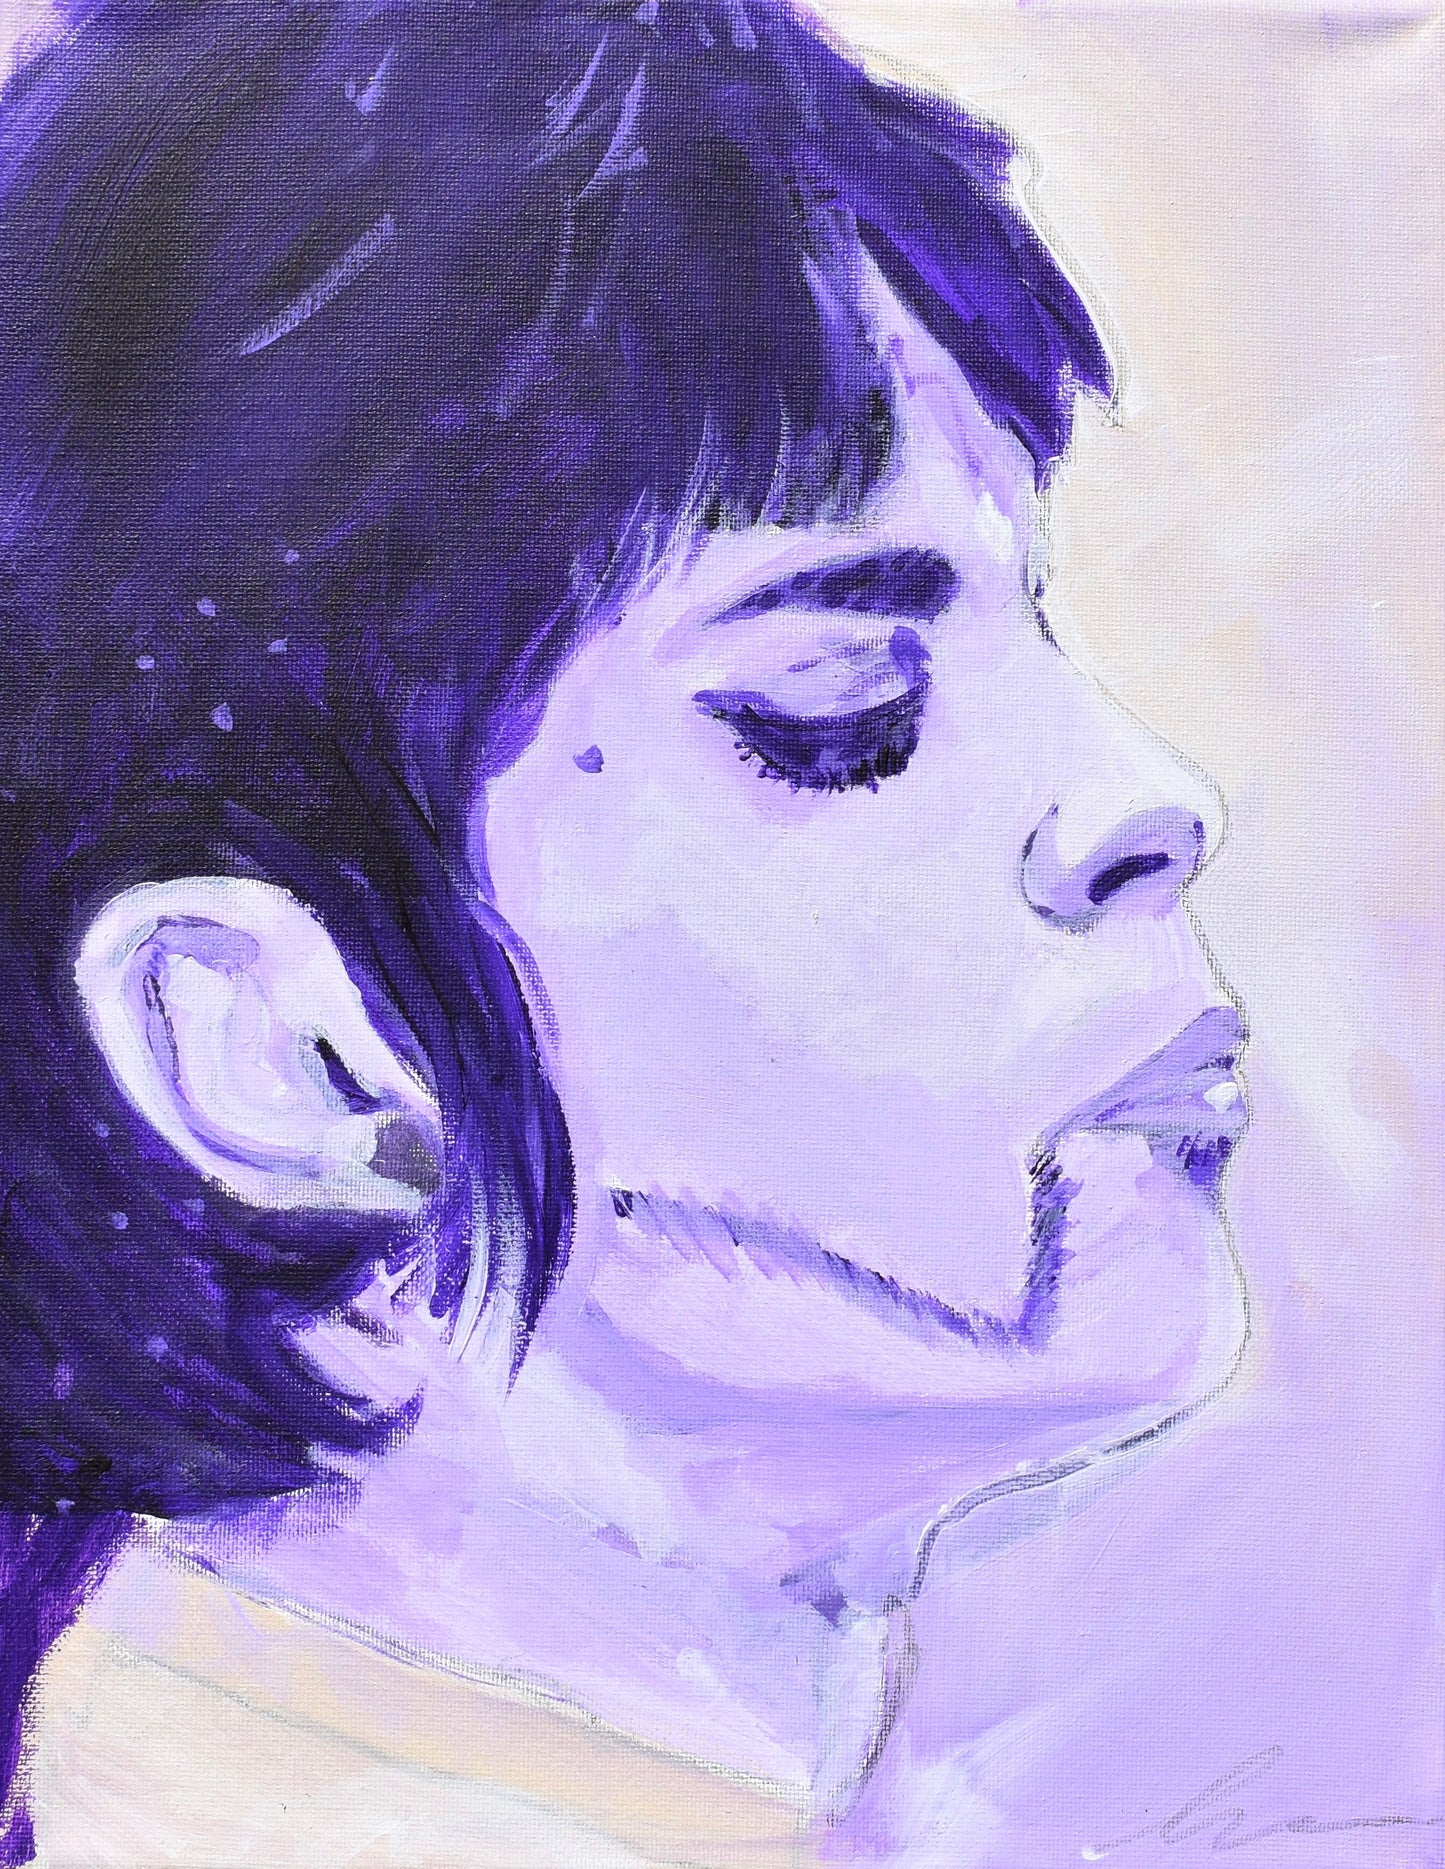 Prince by Heather Eck